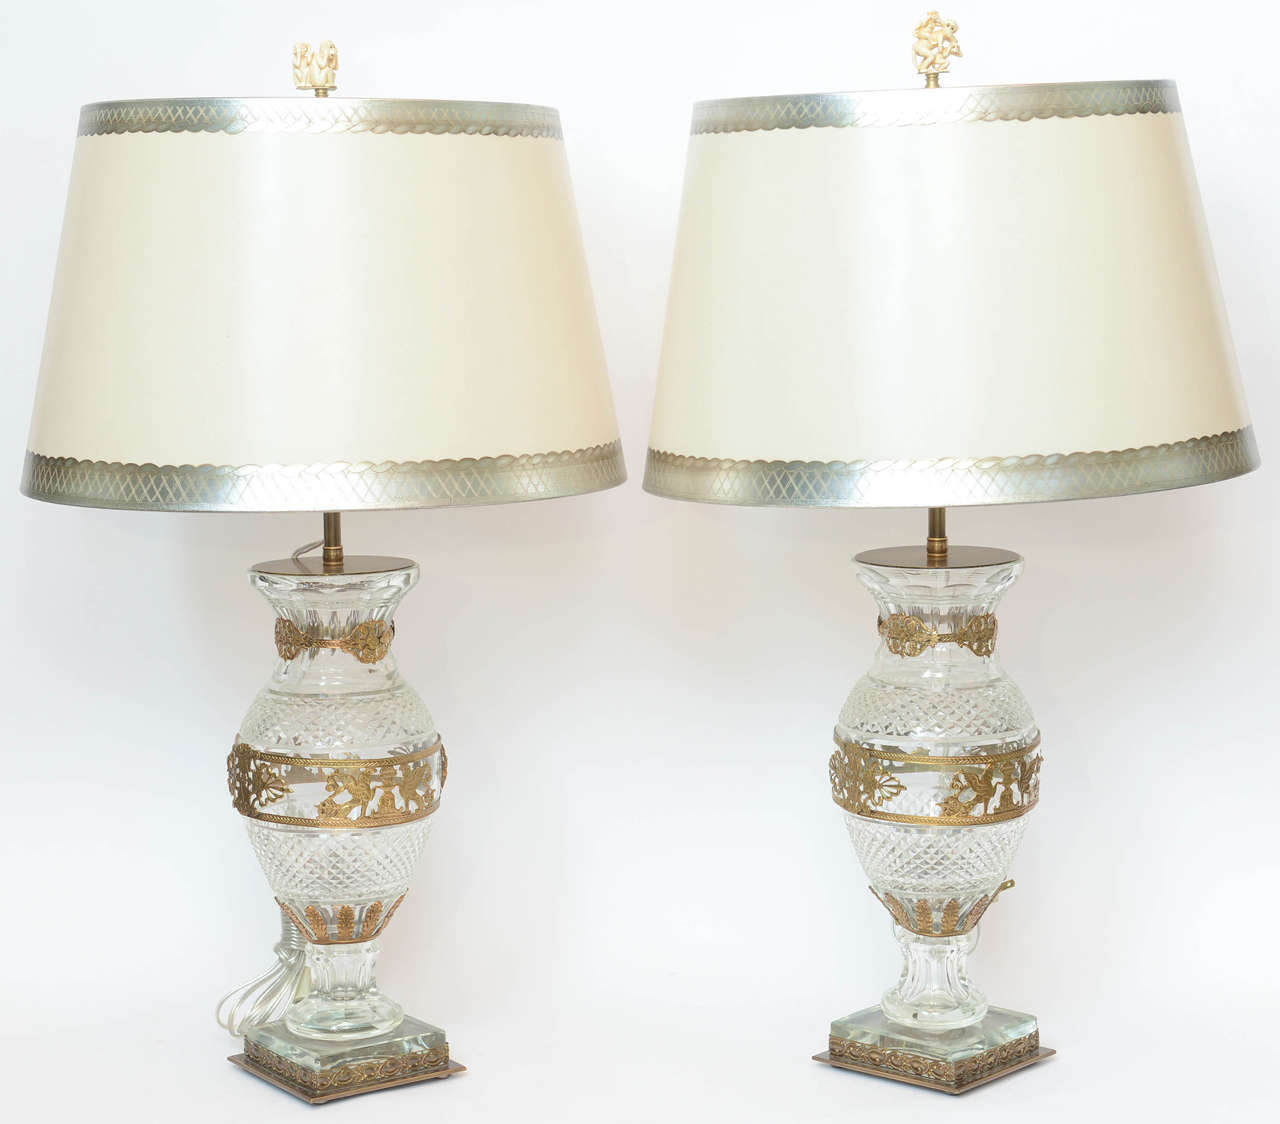 A pair of Baccarat crystal bronze-mounted vases, stamped Baccarat, circa first half of the 20th century.